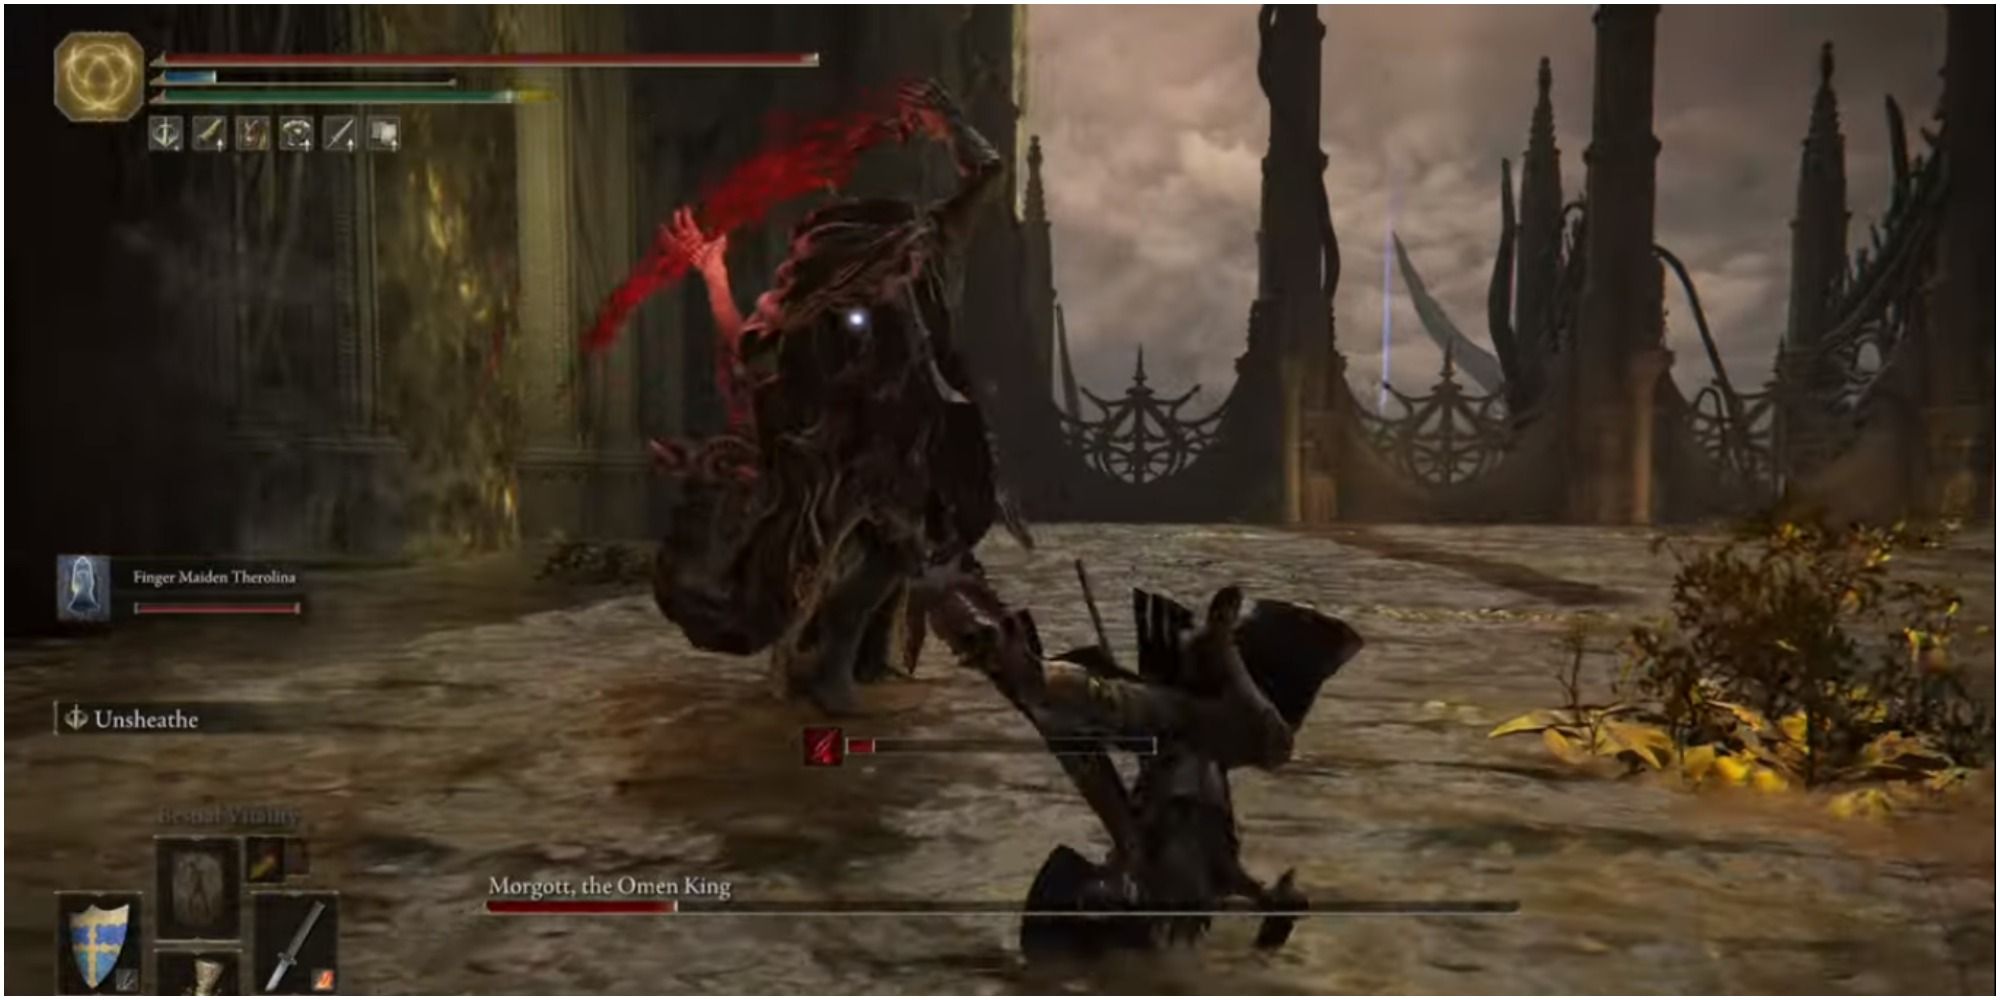 The boss using Blood Slice on the player.